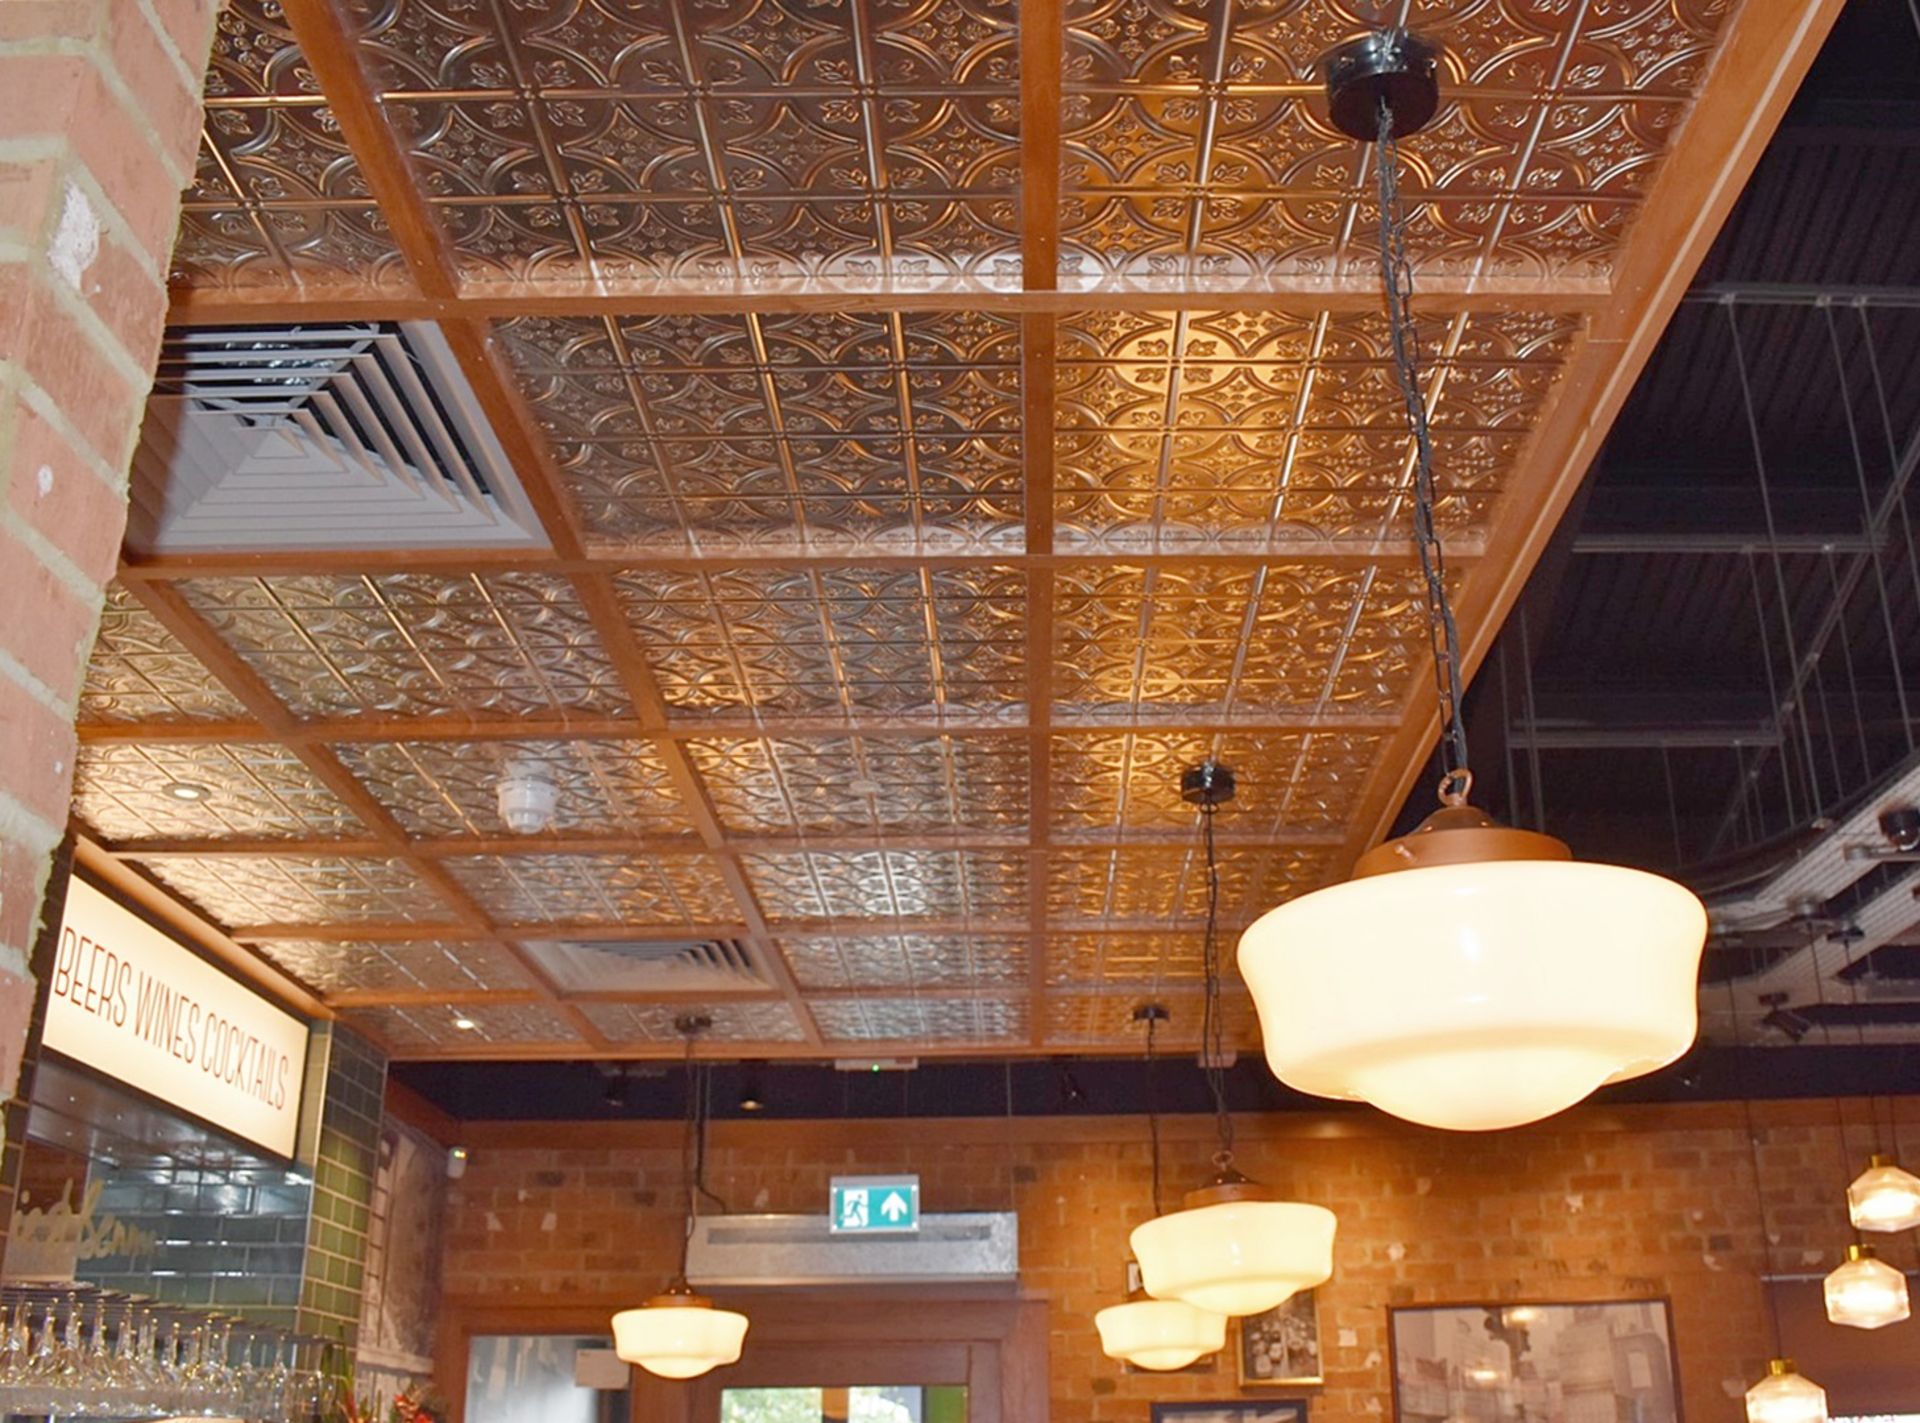 1 x Suspended Decorative Ceiling Feature With a Light Wood Frame and Ornate Tin Insert Panels - L470 - Image 2 of 12